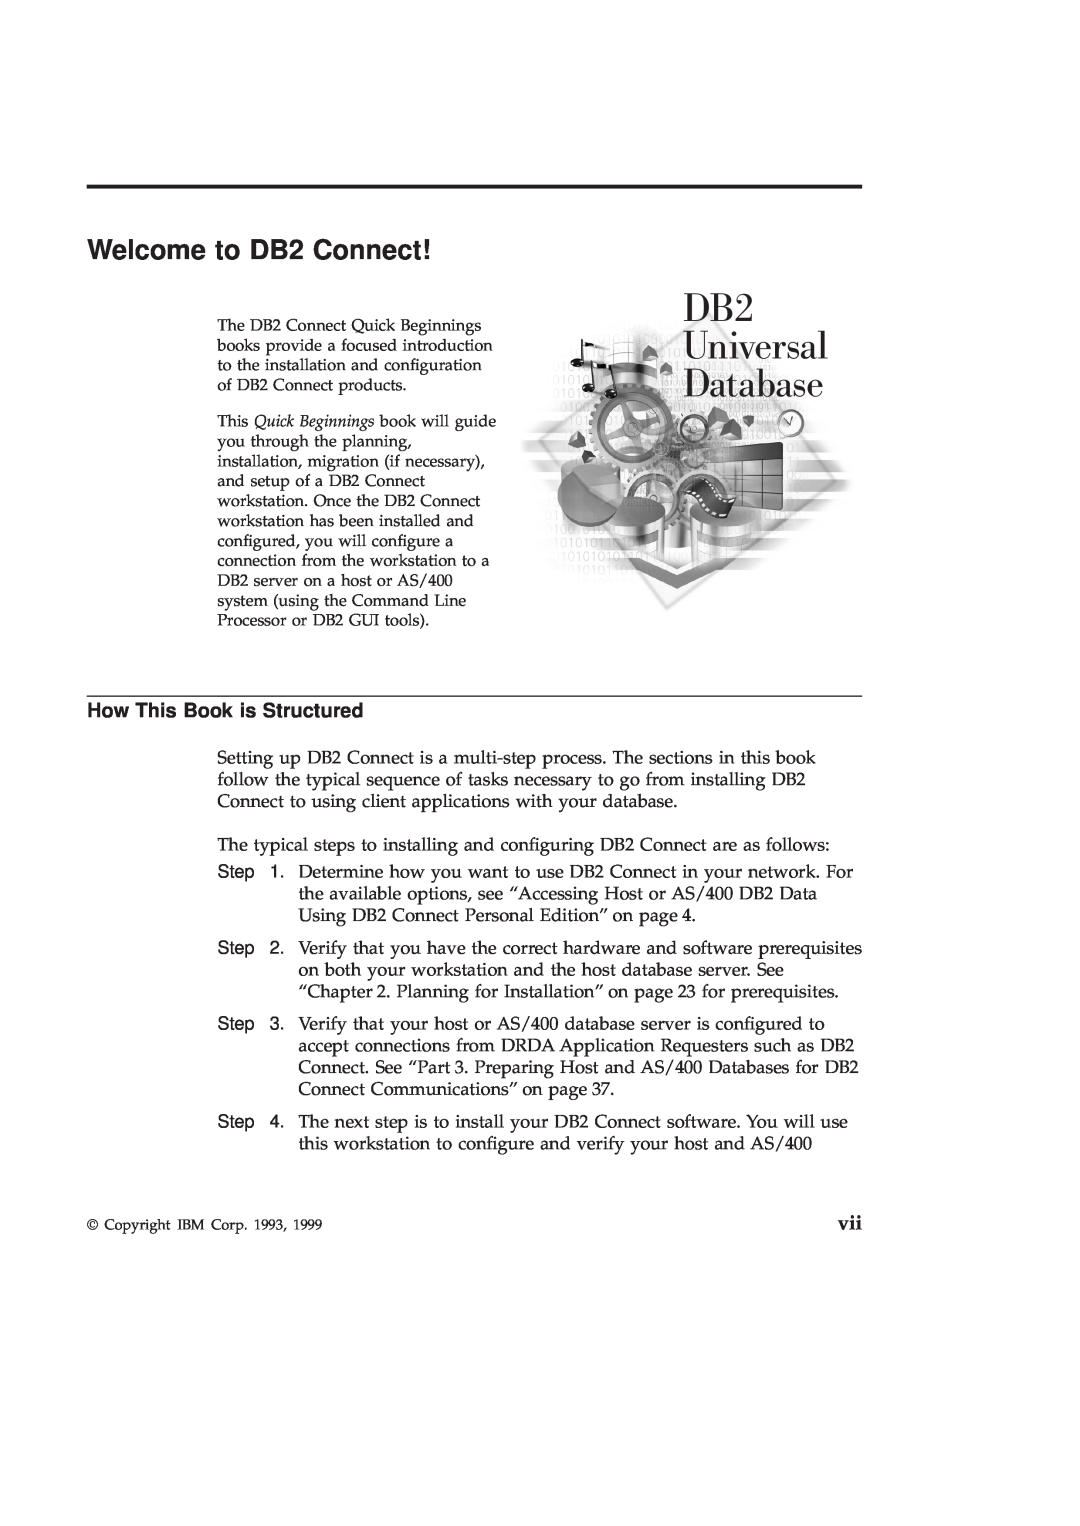 IBM GC09-2830-00 manual Welcome to DB2 Connect, How This Book is Structured, DB2 Universal Database 